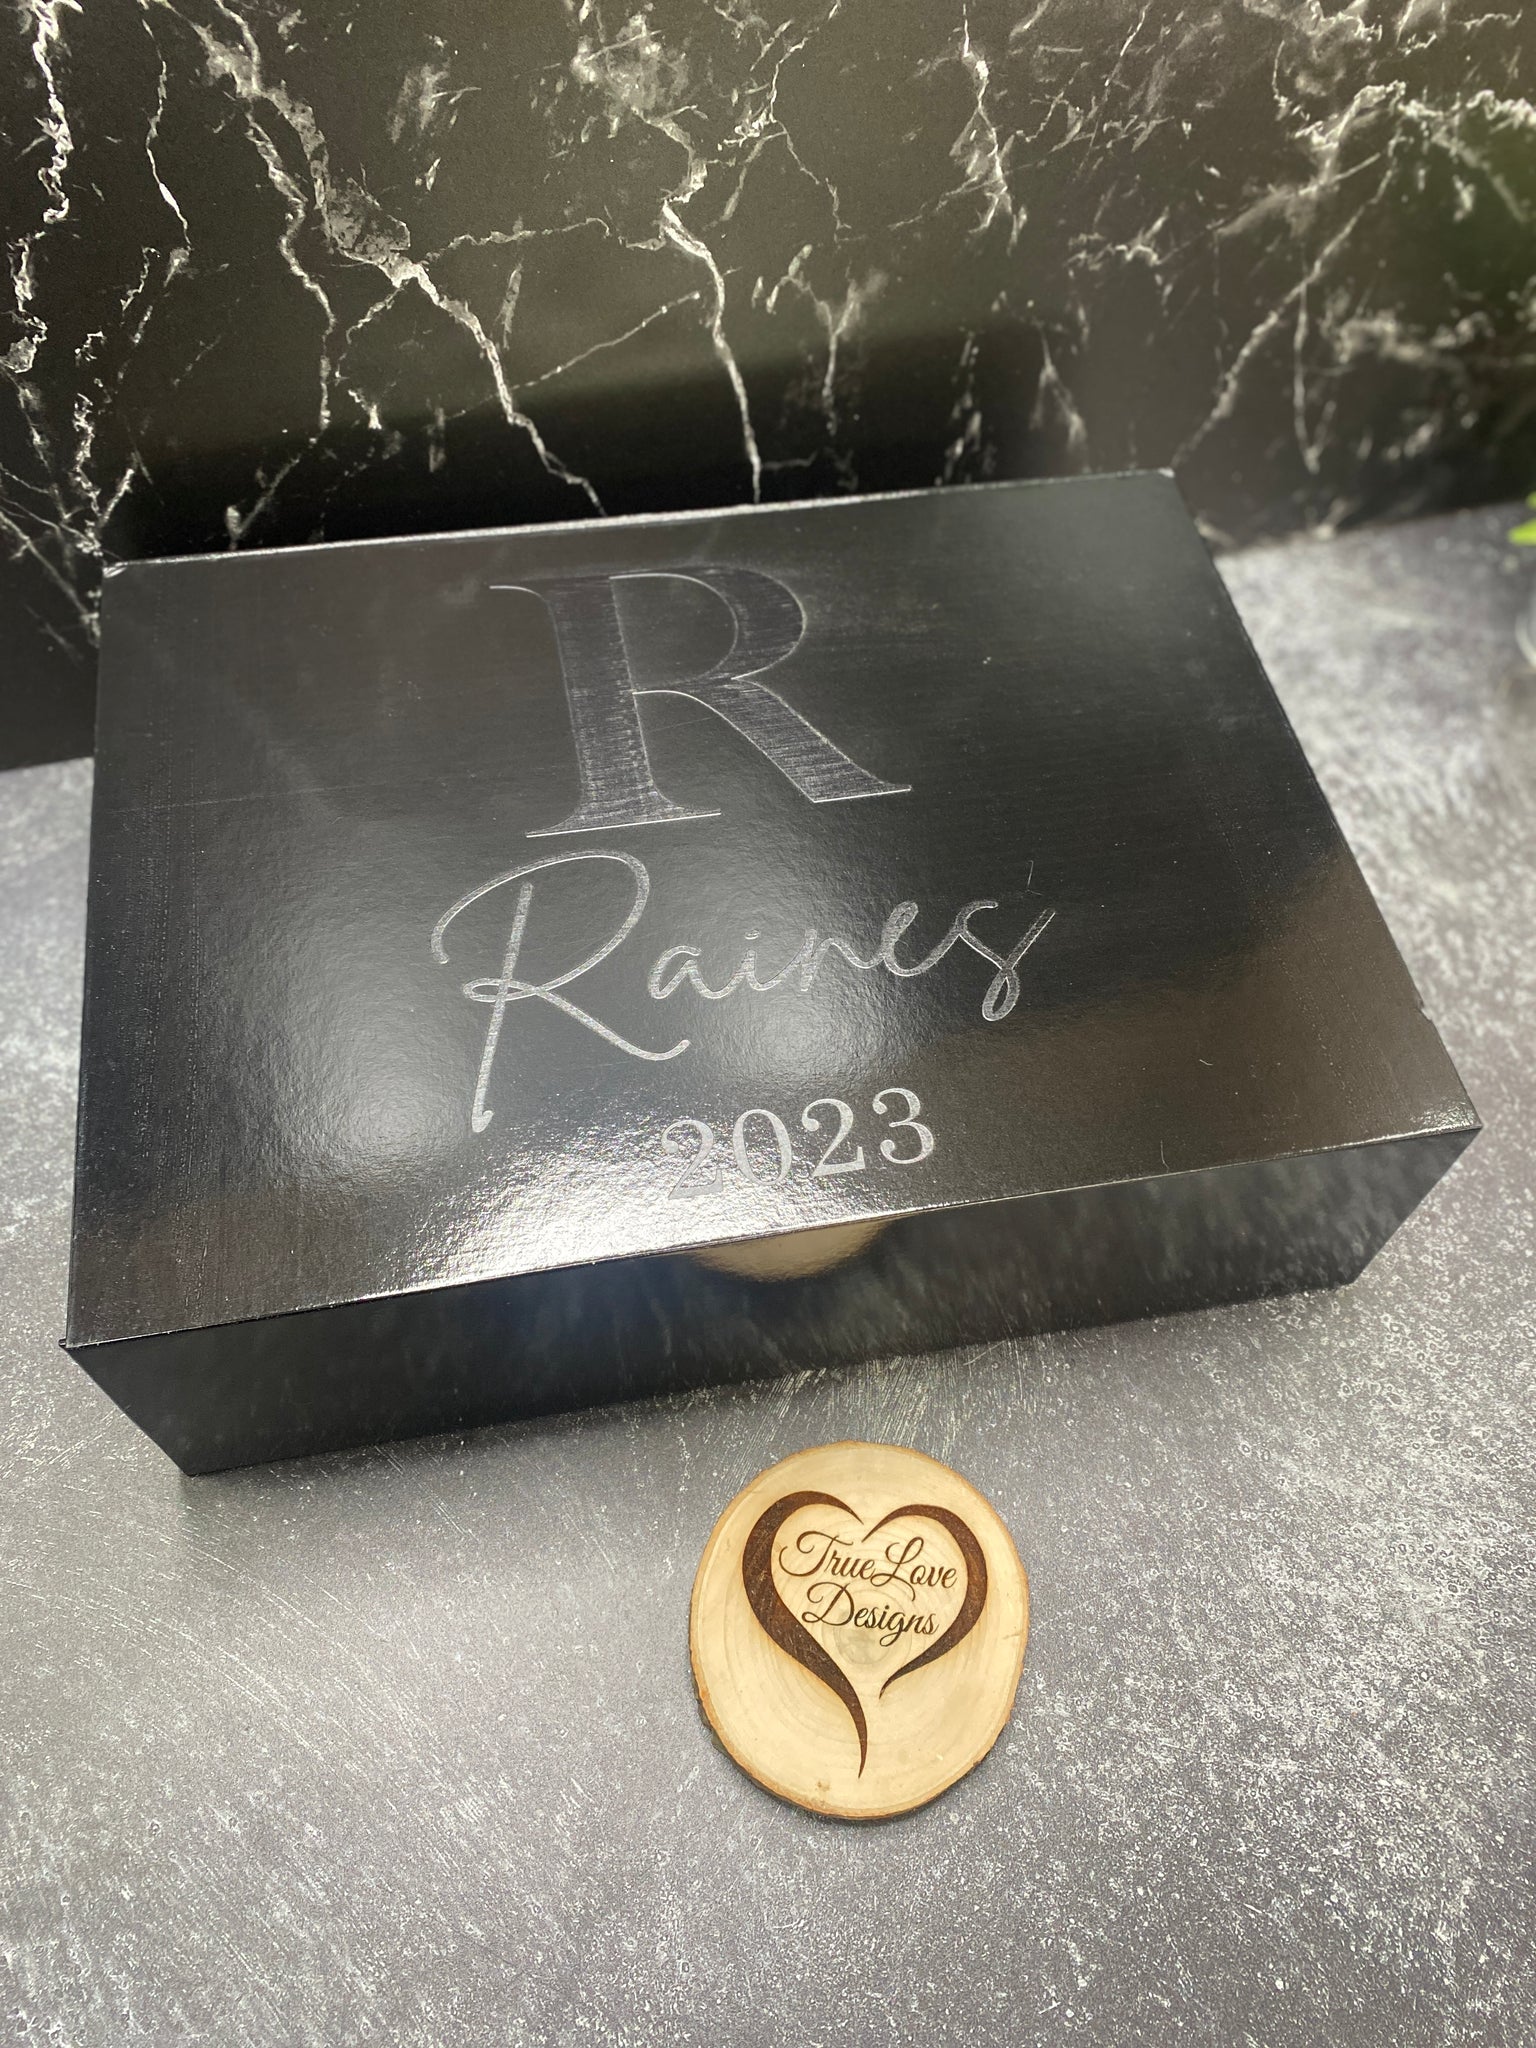 Custom Engraved Louis Vuitton Diamond - Personalized Whiskey Decanter In  Wood Gift Box - Promotional Products - Custom Gifts - Party Favors -  Corporate Gifts - Personalized Gifts